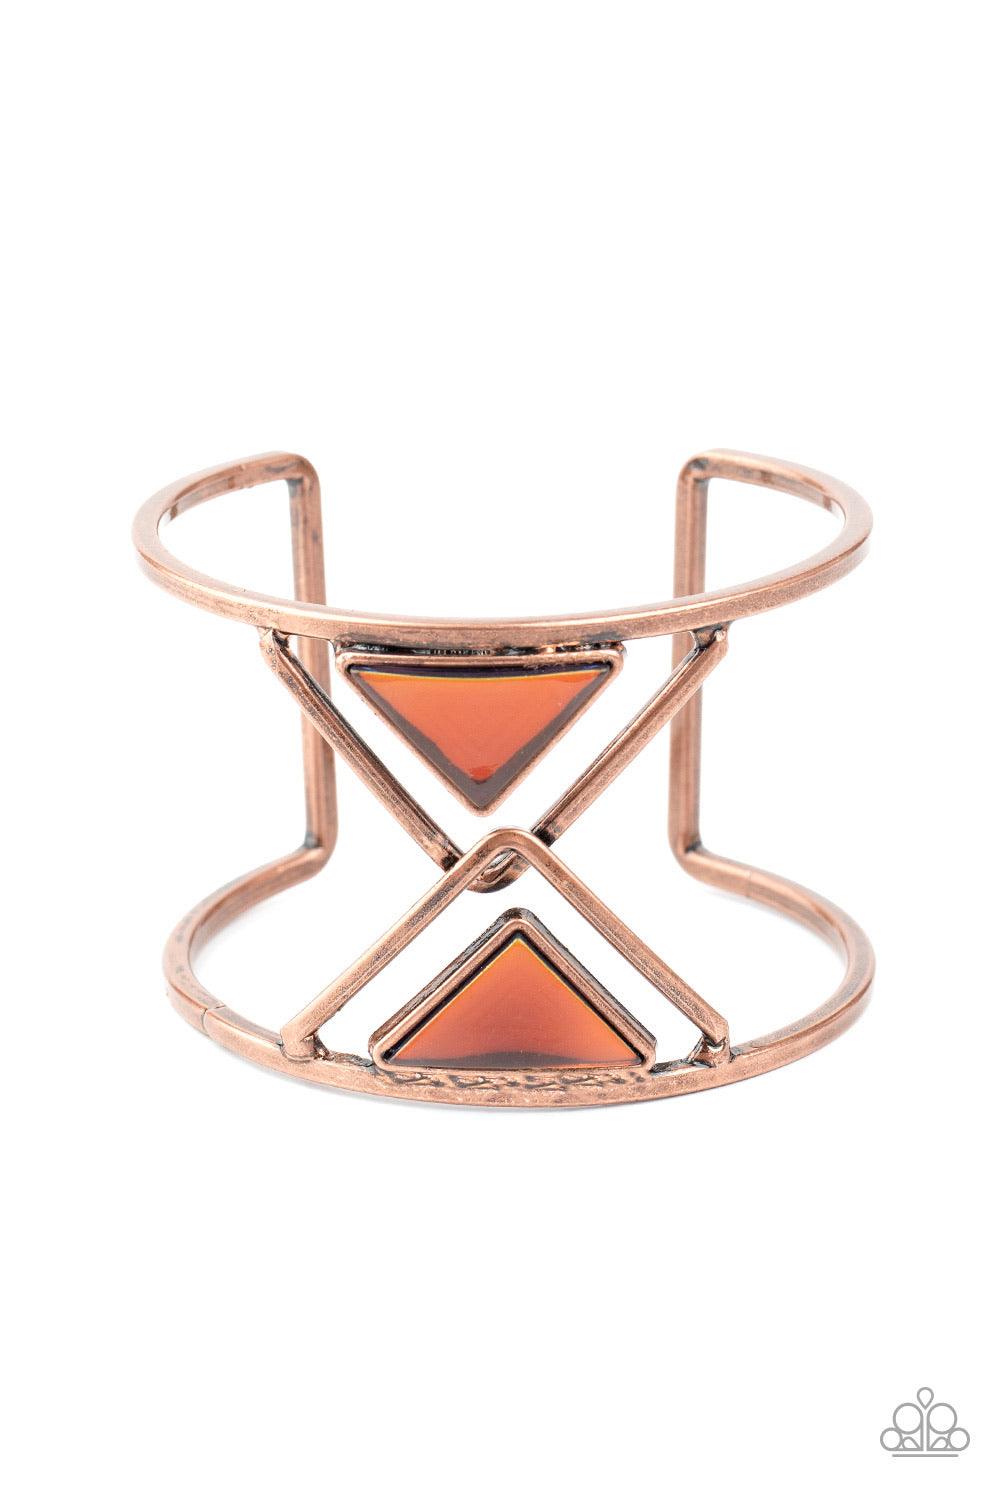 Paparazzi Accessories Pyramid Palace - Copper Featuring an oil spill finish, a pair of coppery acrylic triangles dot the centers of two overlapping copper triangle frames inside an airy silver cuff for an edgy fashion. Sold as one individual bracelet. Jew